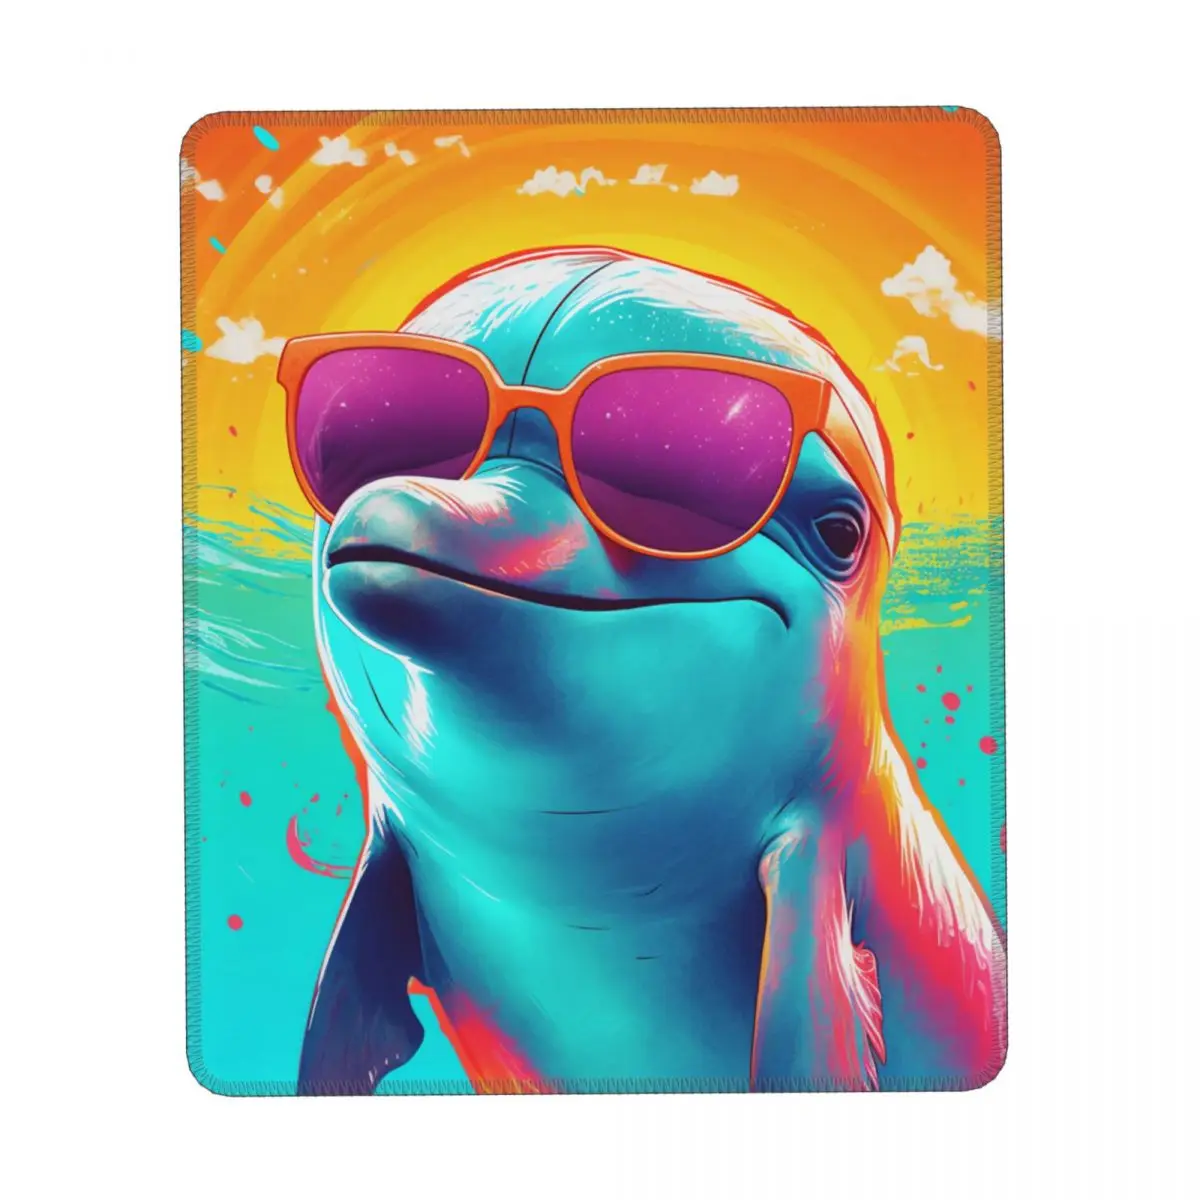 

Dolphin Vertical Print Mouse Pad Sunny Beach Sunglasses Fantasy Rubber Mousepad Anti-Slip Simple Table Mouse Pads